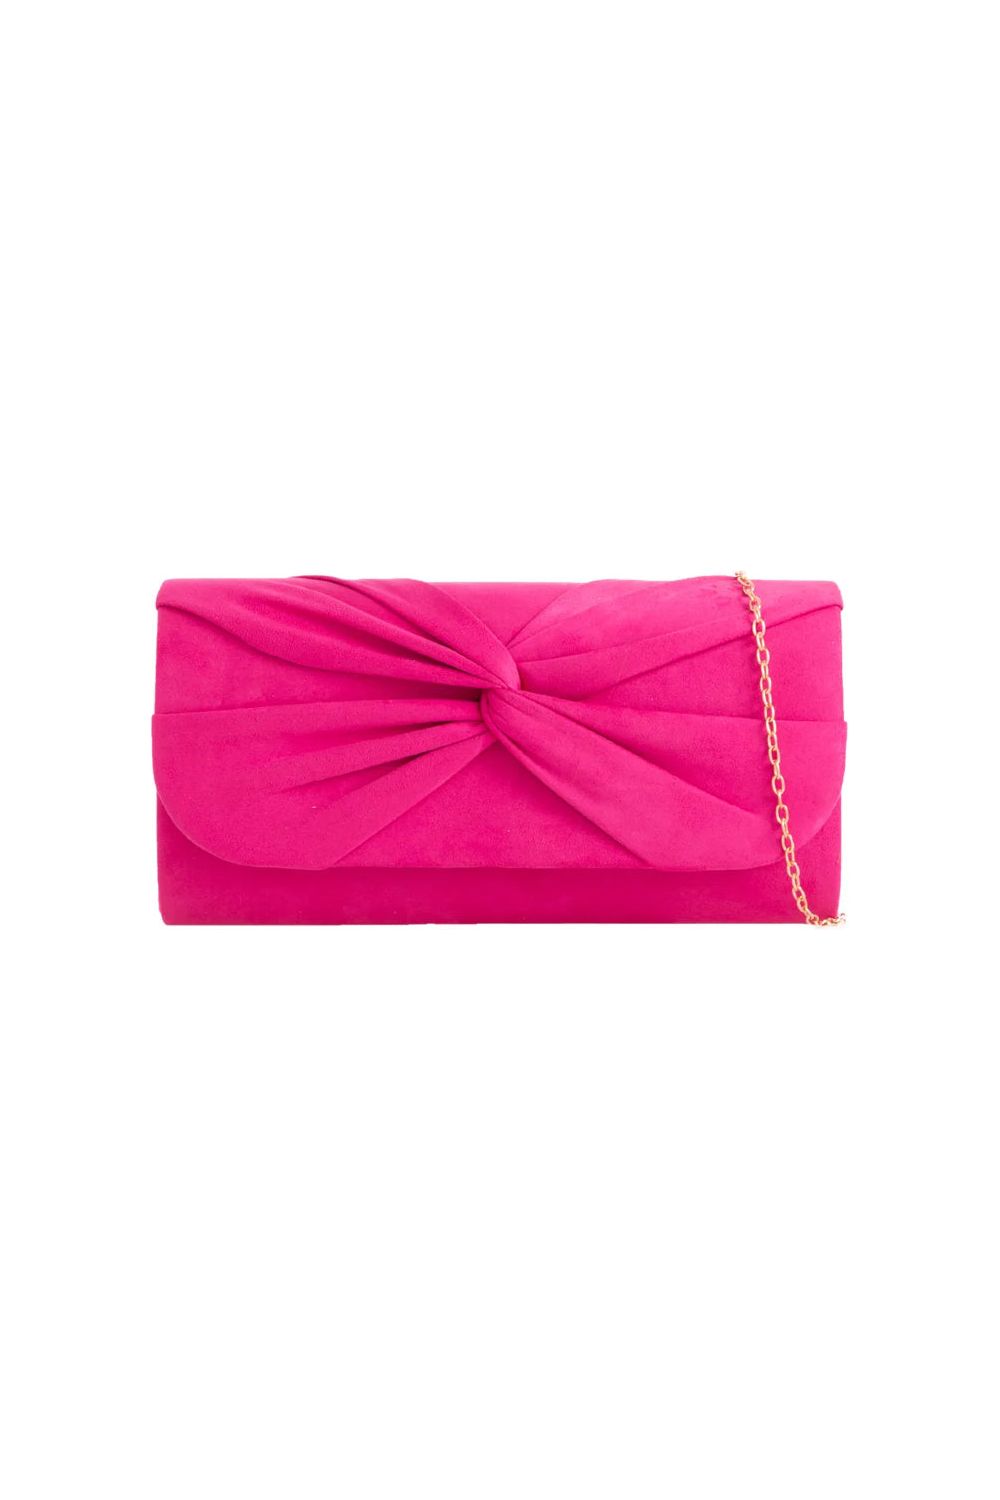 Fuchsia Suede Clutch Bag With Knot Detail ALJ2724